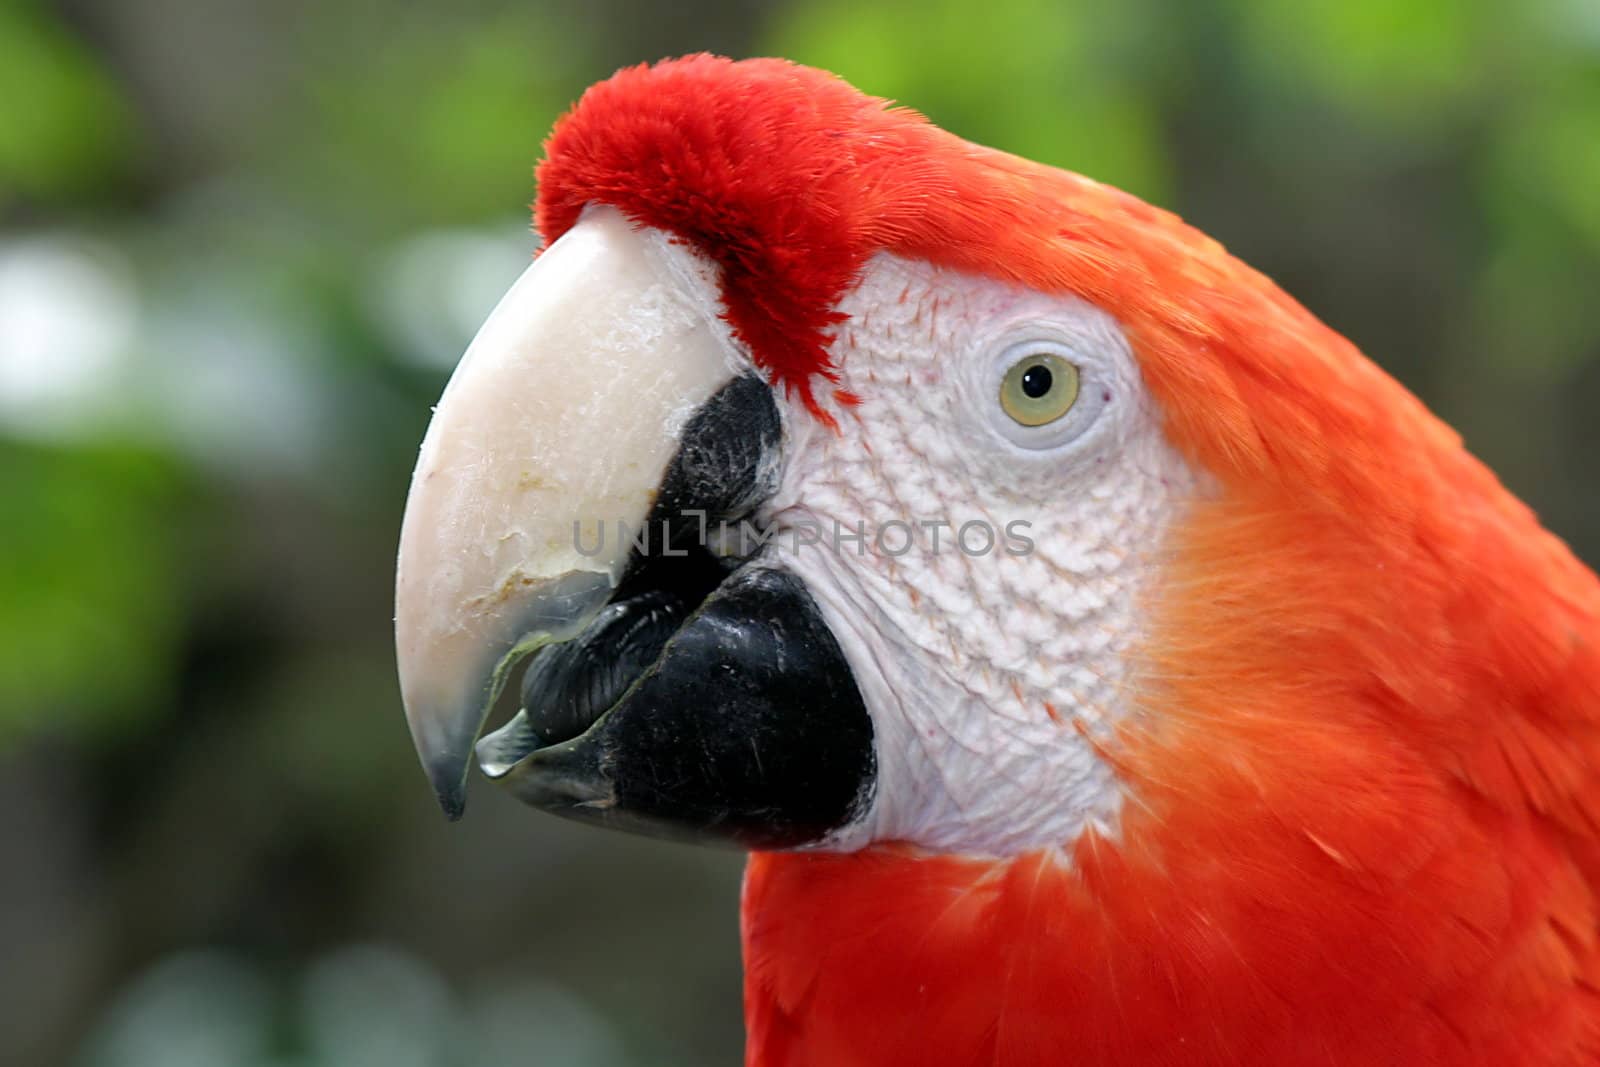 The Scarlet Macaw is a large colorful parrot.